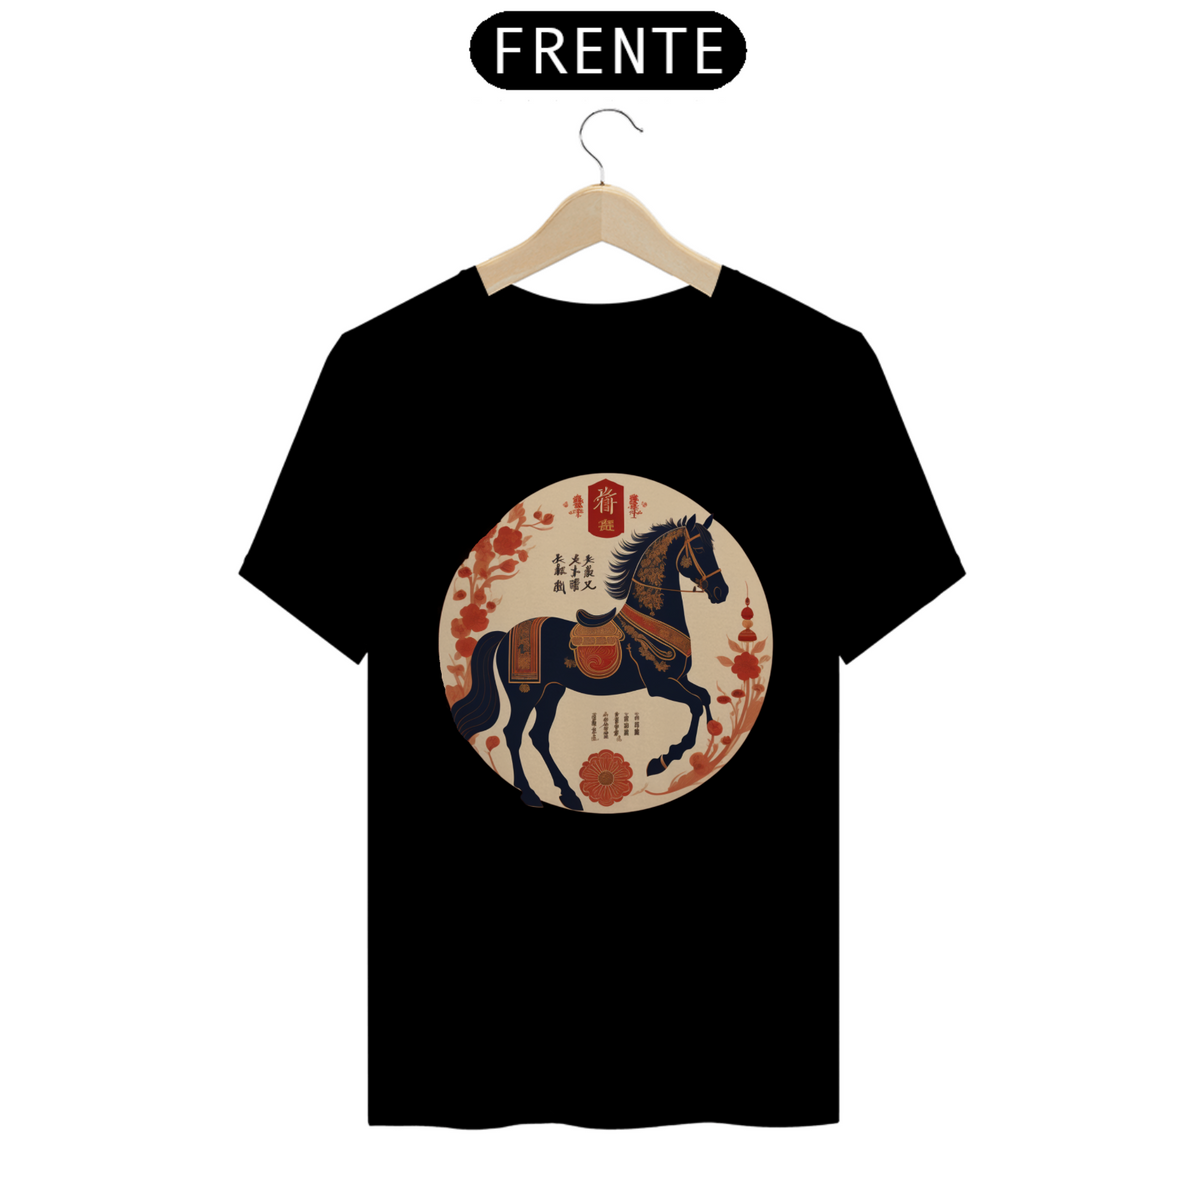 Nome do produto: Chinese New Year (Eclipse) - T-Shirt Black Horse